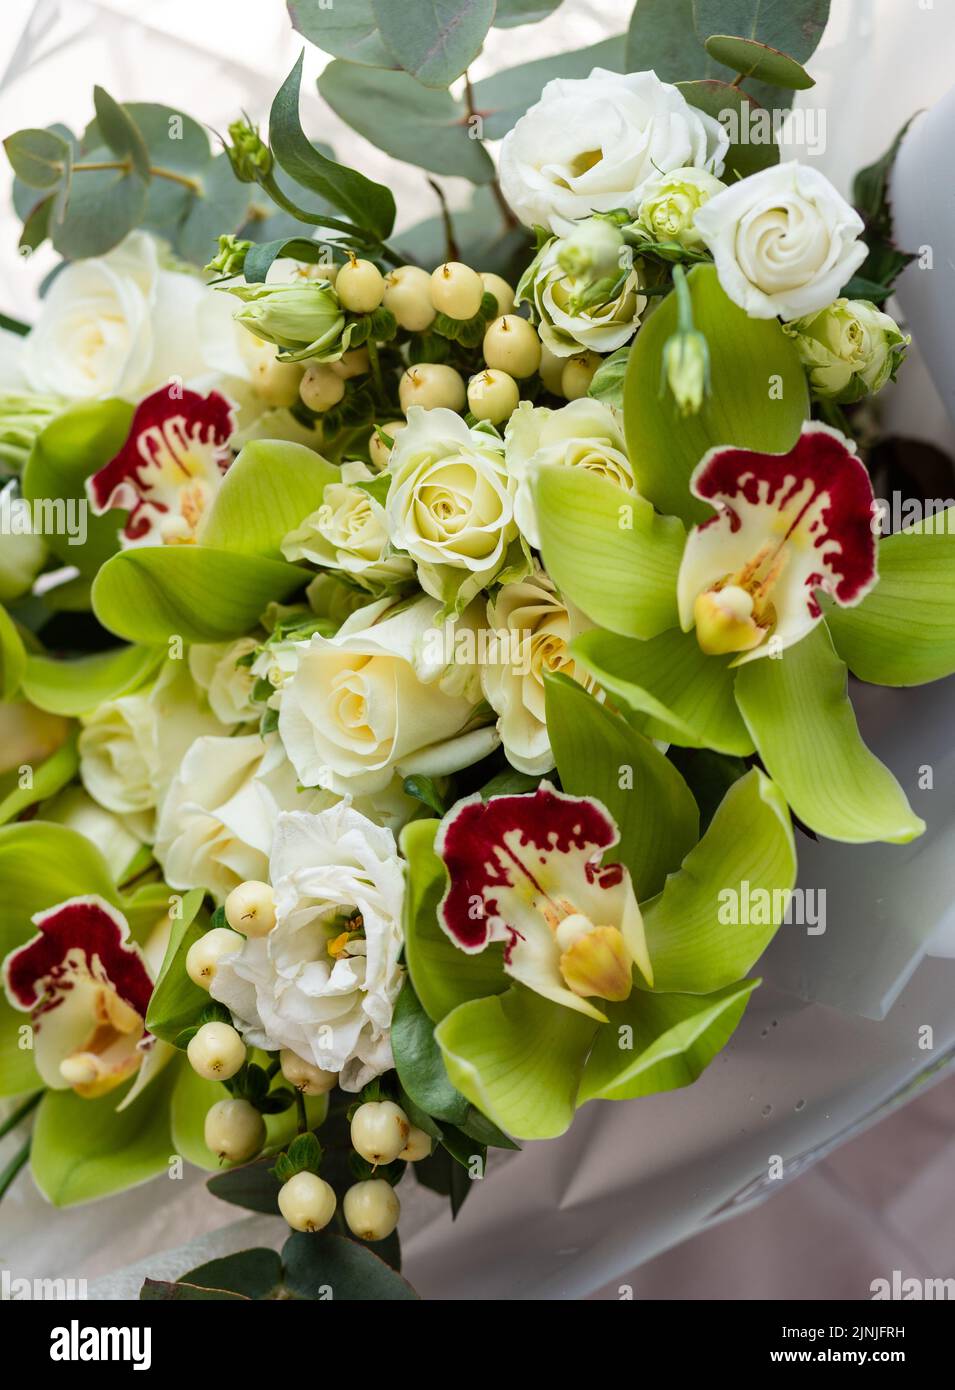 Fresh flowers for any holiday. Close up of a bouquet in green color scheme with roses, eustoma and irises. Concept of floristics and flower arrangemen Stock Photo